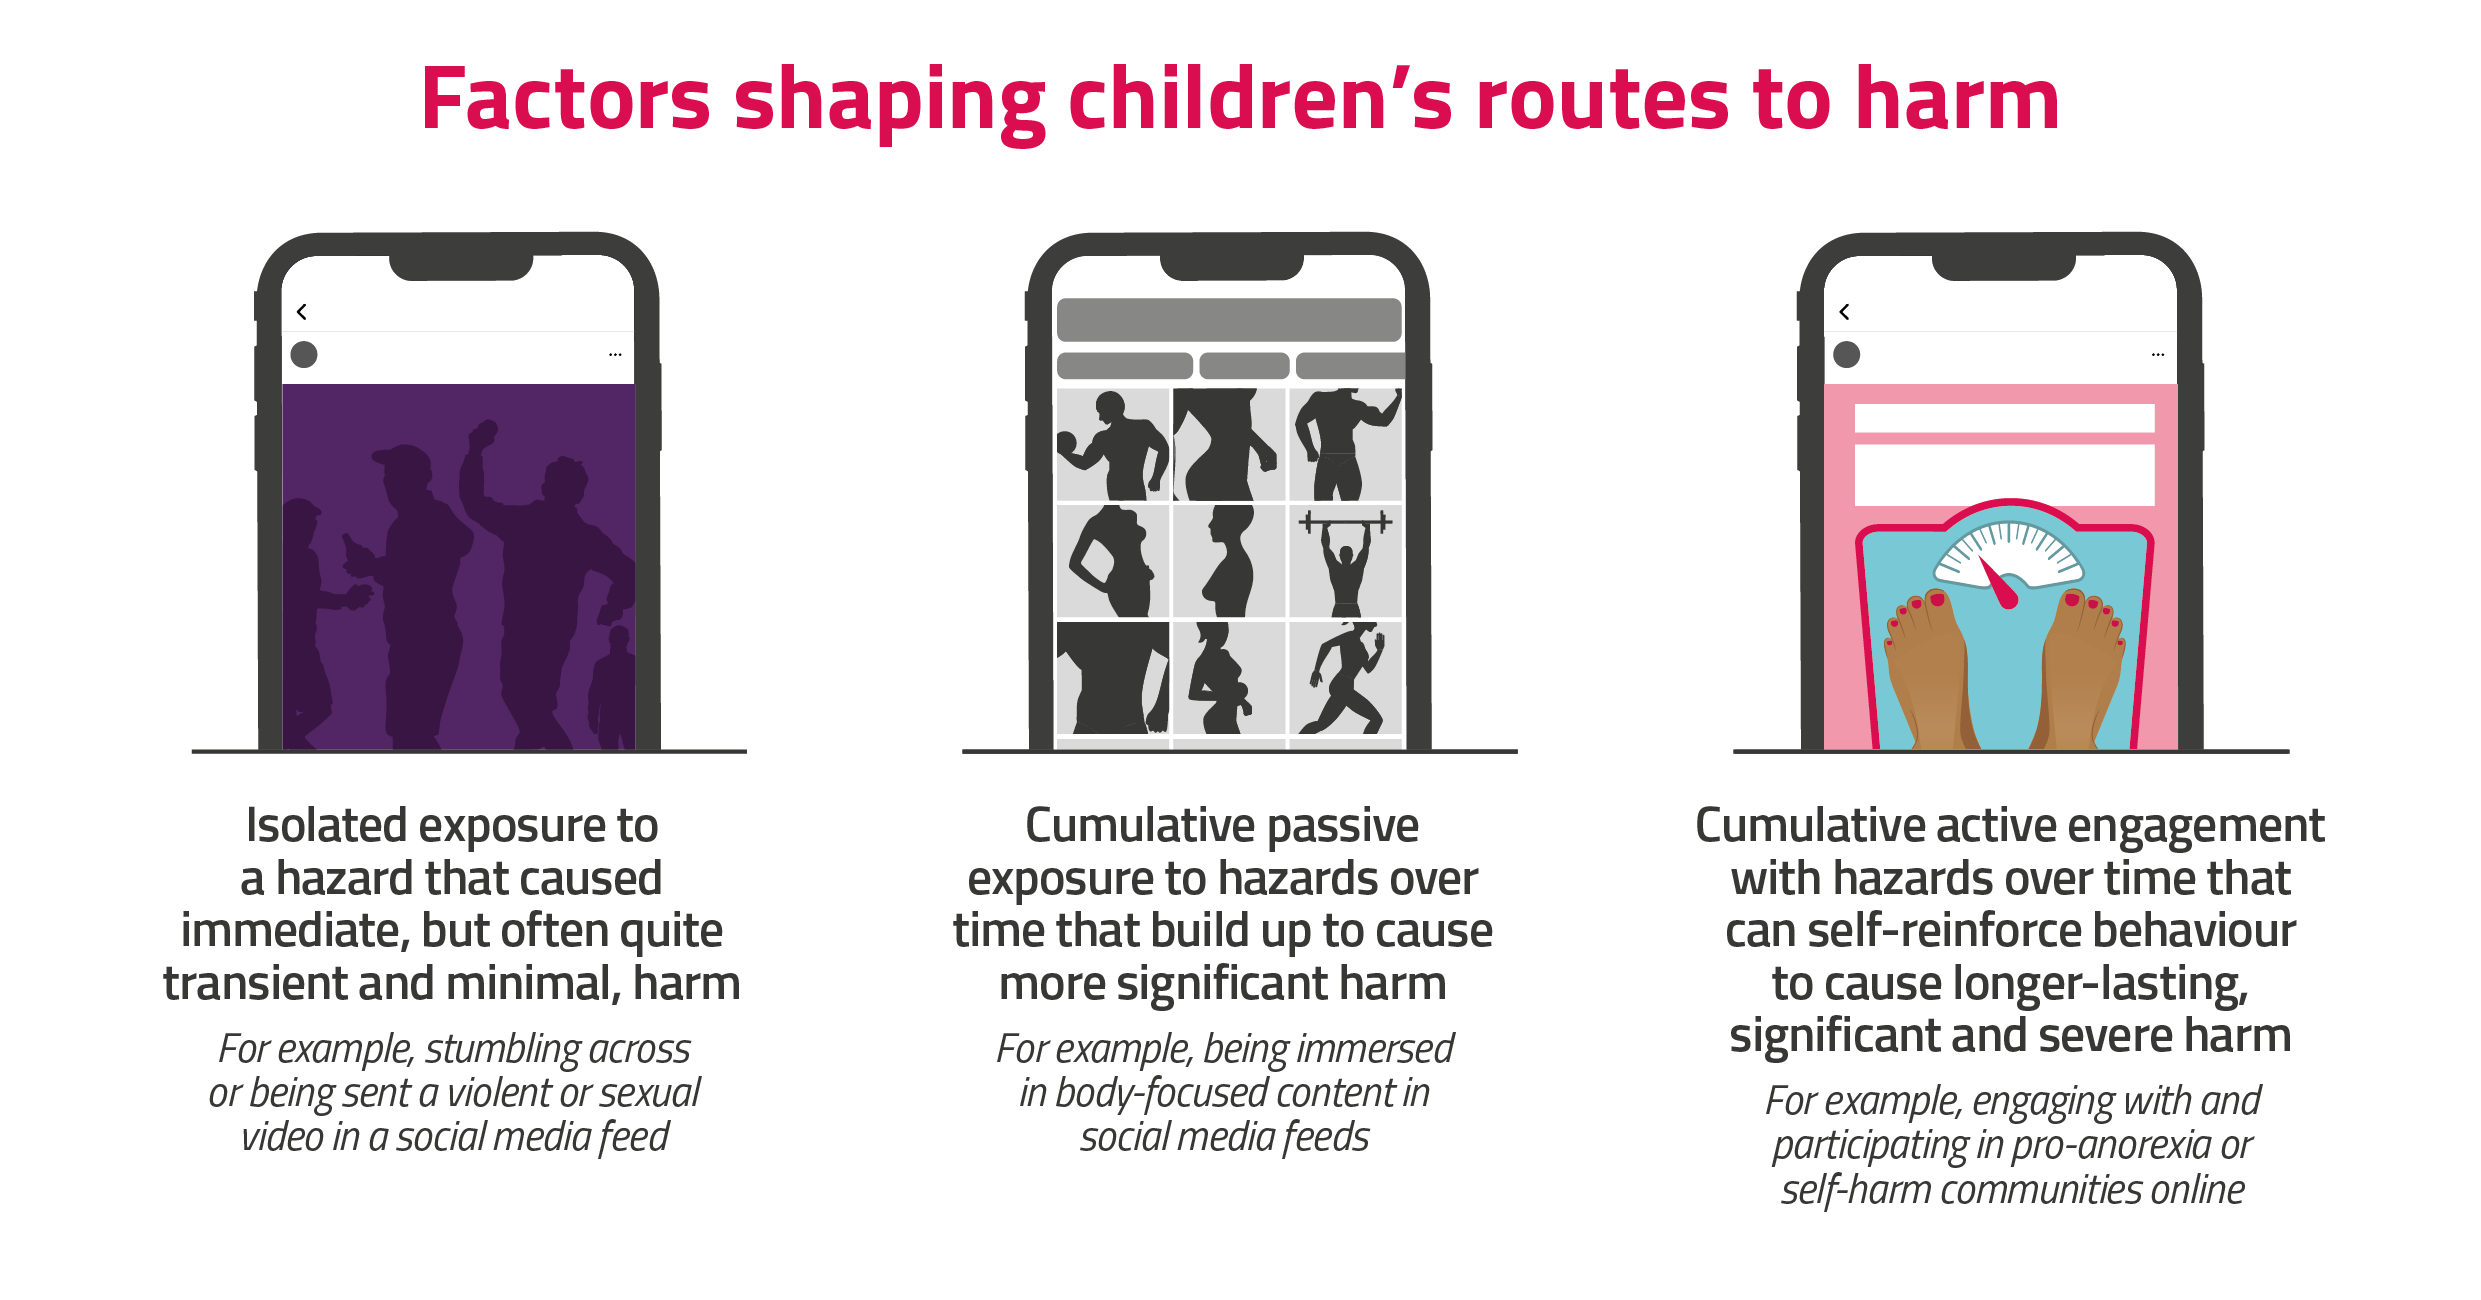 Children face many routes to harm online, including isolated exposures (for example, stumbling across a violent video in their social media feed) or cumulative, passive exposure over time (like being immersed in body-focused content in their feeds).